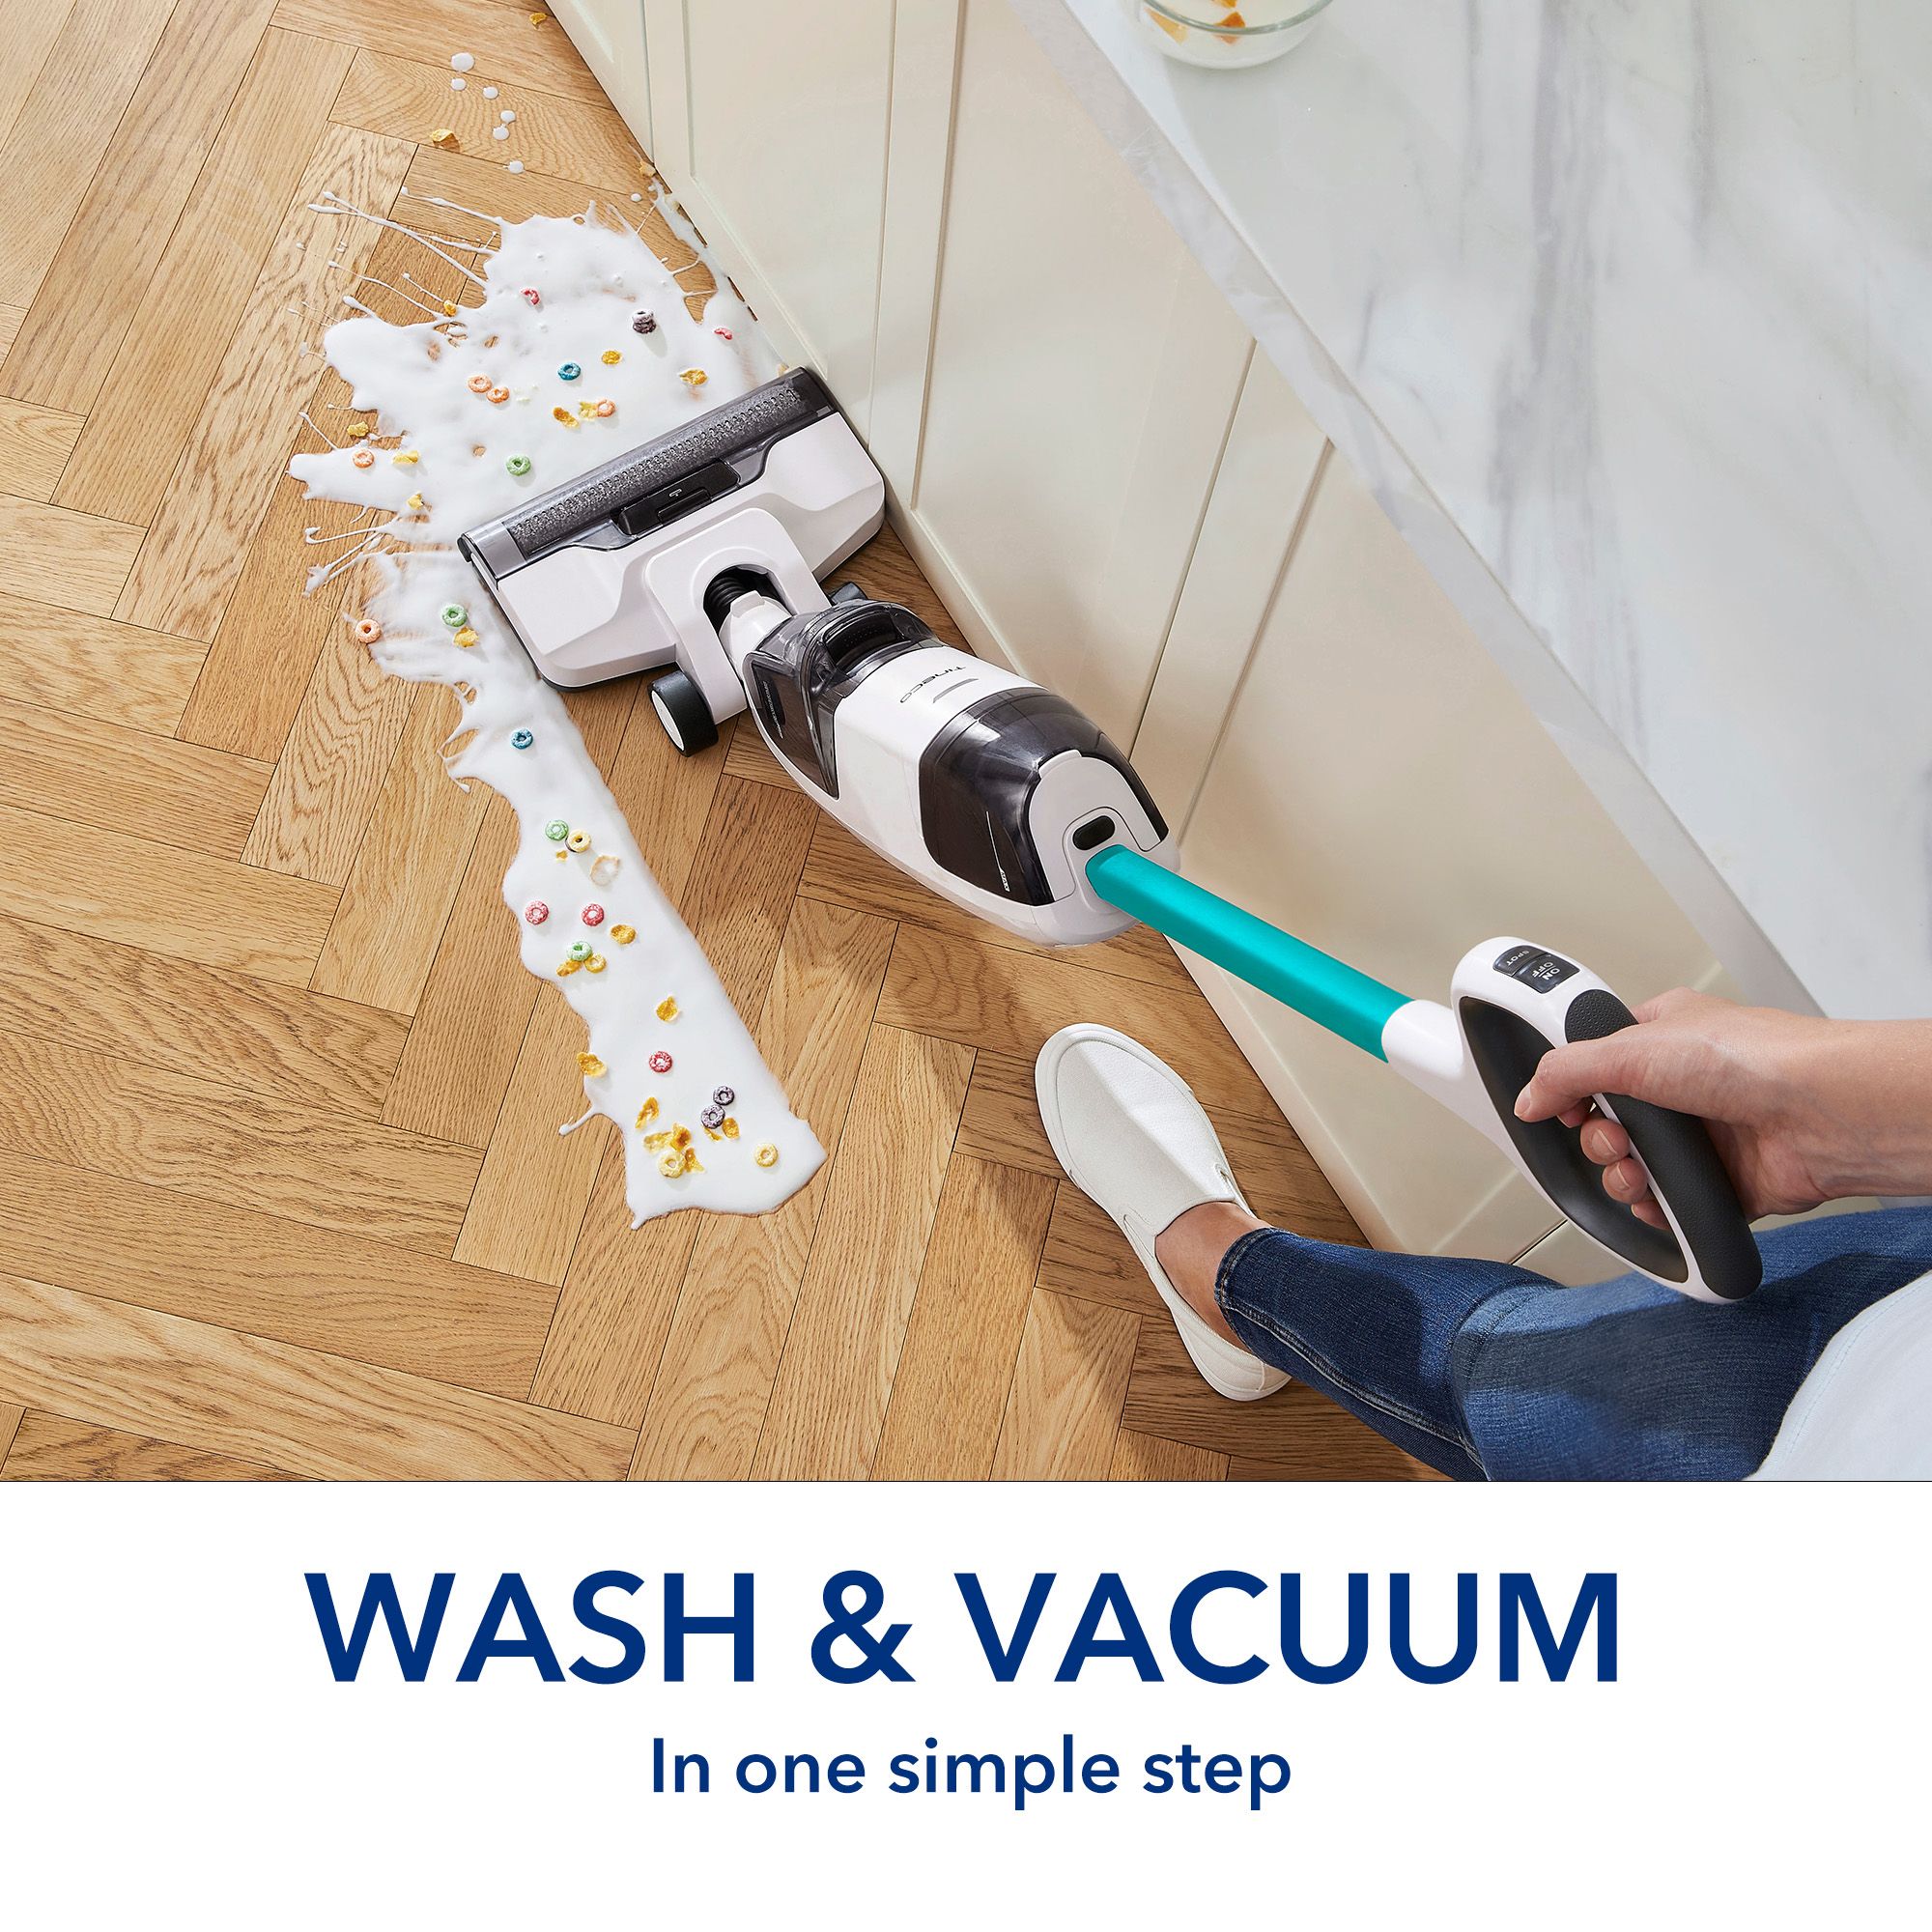 Tineco iFloor 2 Max Cordless Wet/Dry Vacuum Cleaner and Hard Floor Washer - Limited Edition (Blue) - image 3 of 6